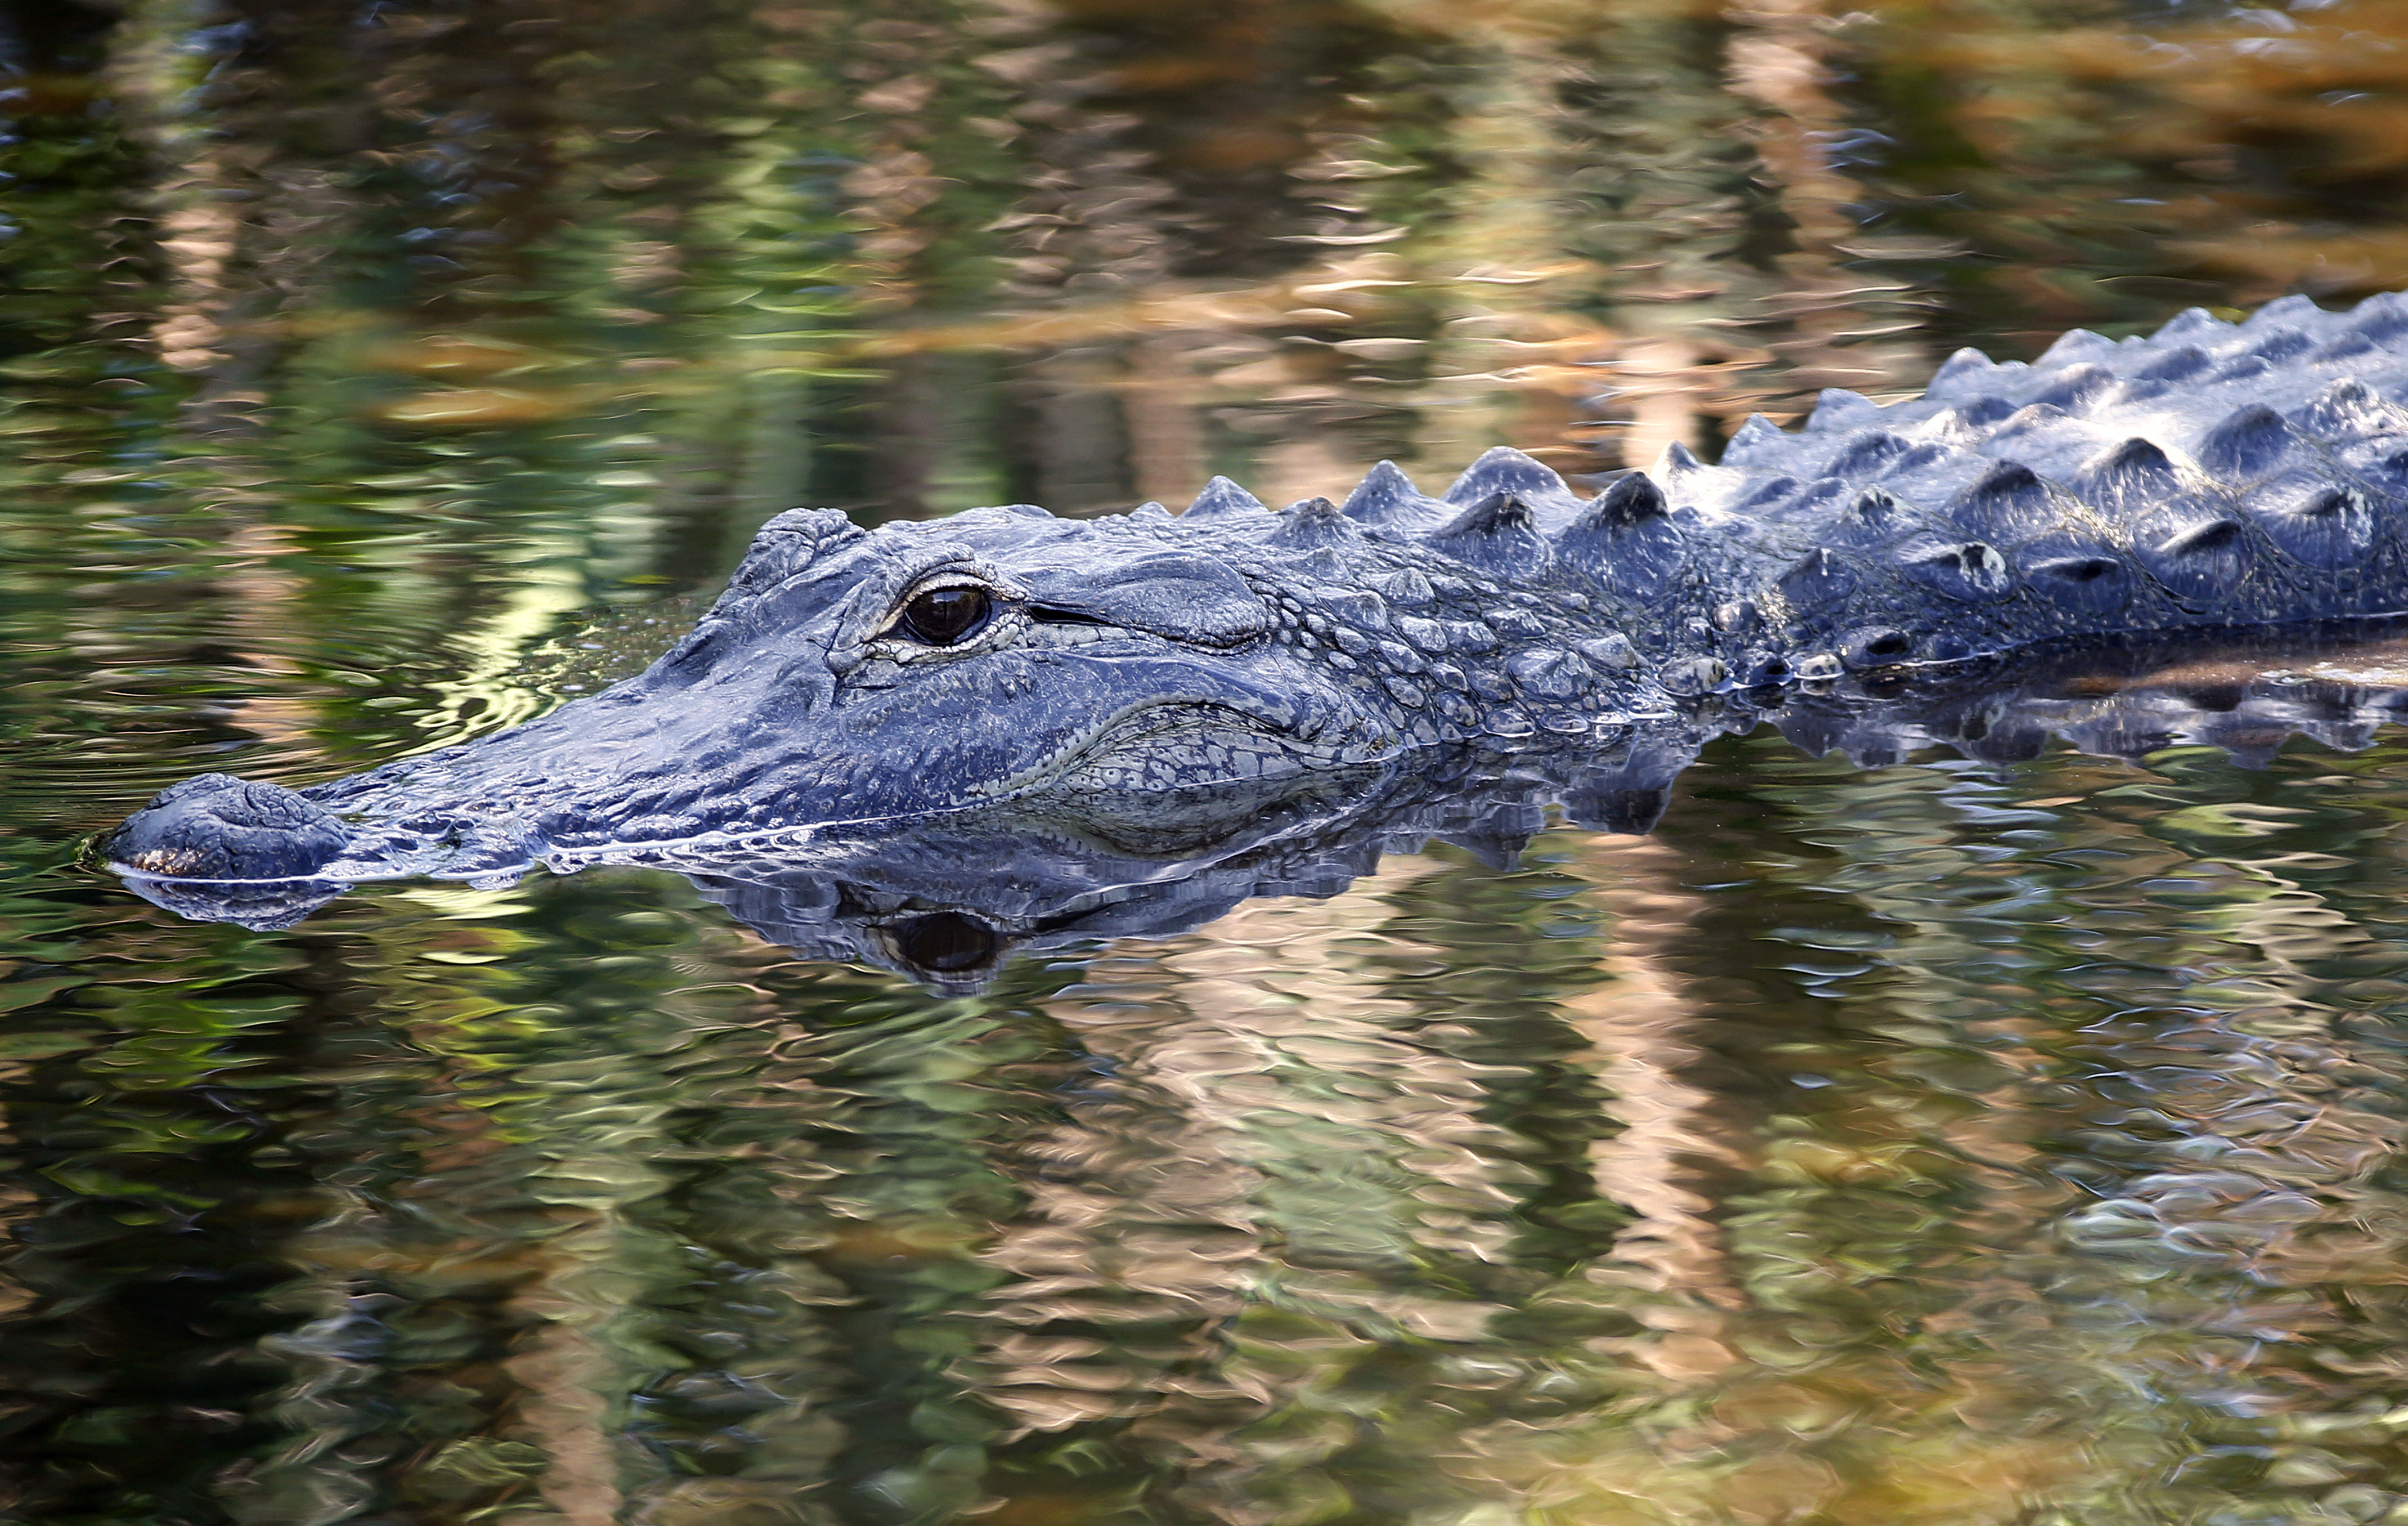 An alligator swims in the waters at Wakodahatchee Wetlands in Delray Beach, Florida on 21 April 2016.
                      Spring is nesting season in South Florida and over 140 species of birds have been spotted in the wetlands. (Rhona Wise&mdash;AFP/Getty Images)